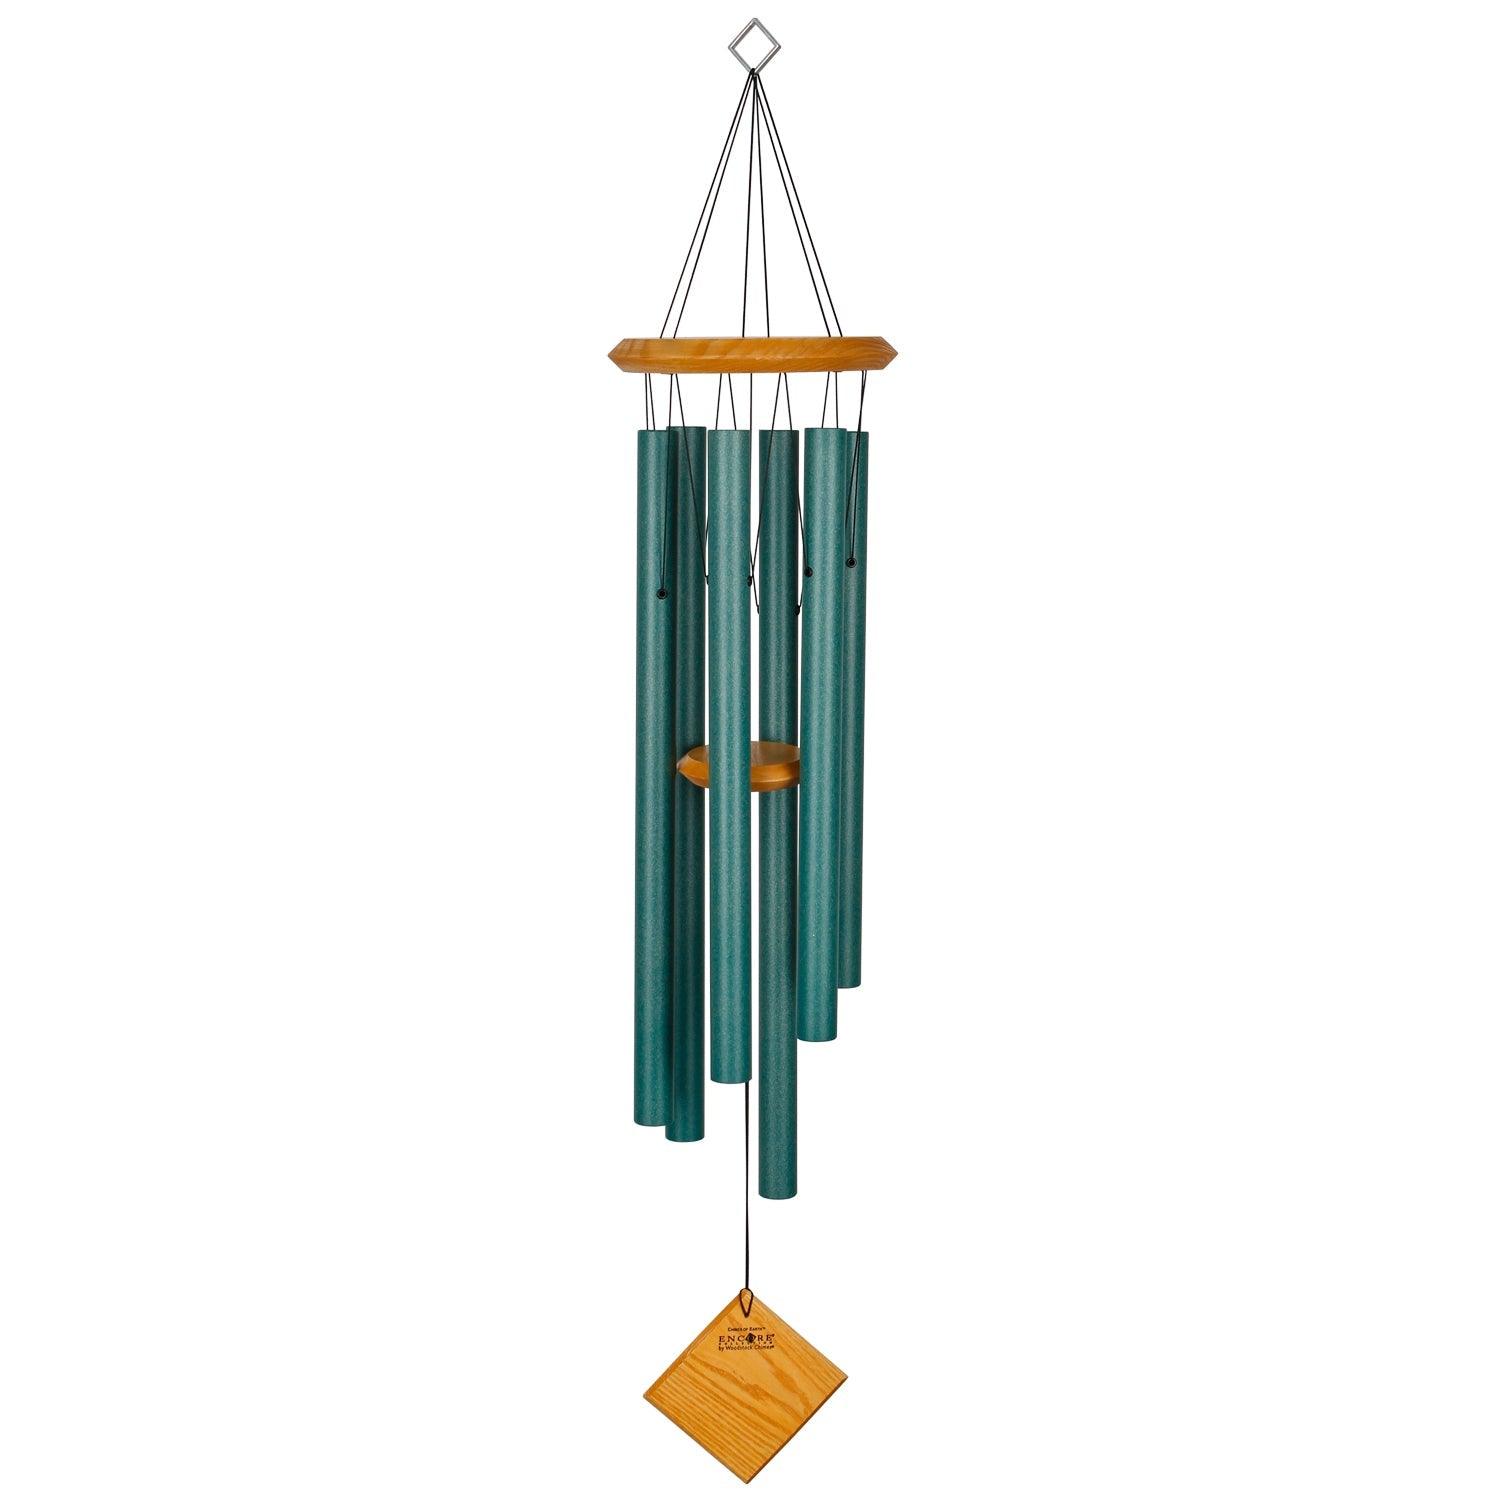 Beautifully crafted with cherry finish wood and six verdigris aluminum tubes, this windchime measures 37 inches long and 7 inches in diameter. It's a charming addition to any outdoor space, providing soothing sounds and a touch of elegance.